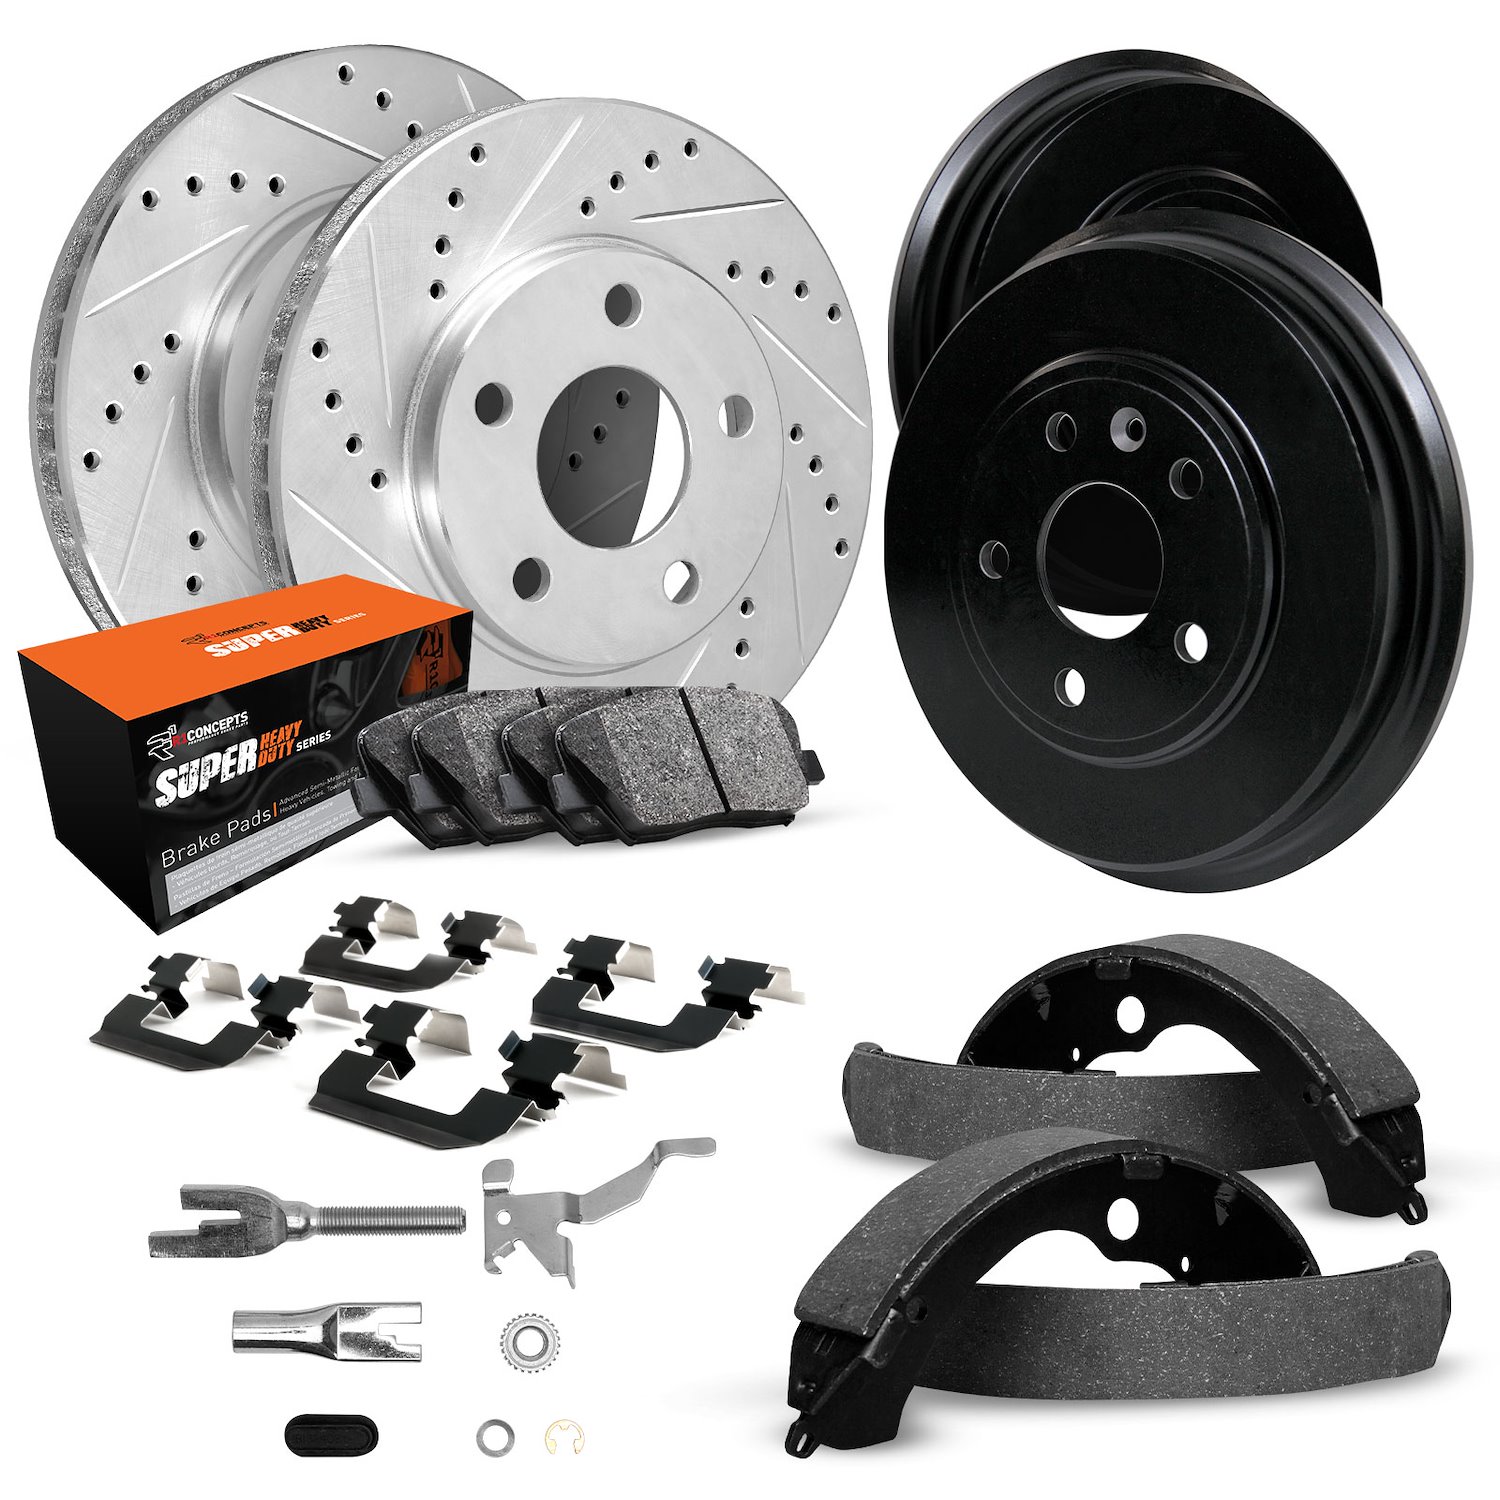 E-Line Drilled/Slotted Silver Rotor & Drum Set w/Super-Duty Pads, Shoes/Hardware/Adjusters, 2004-2008 GM